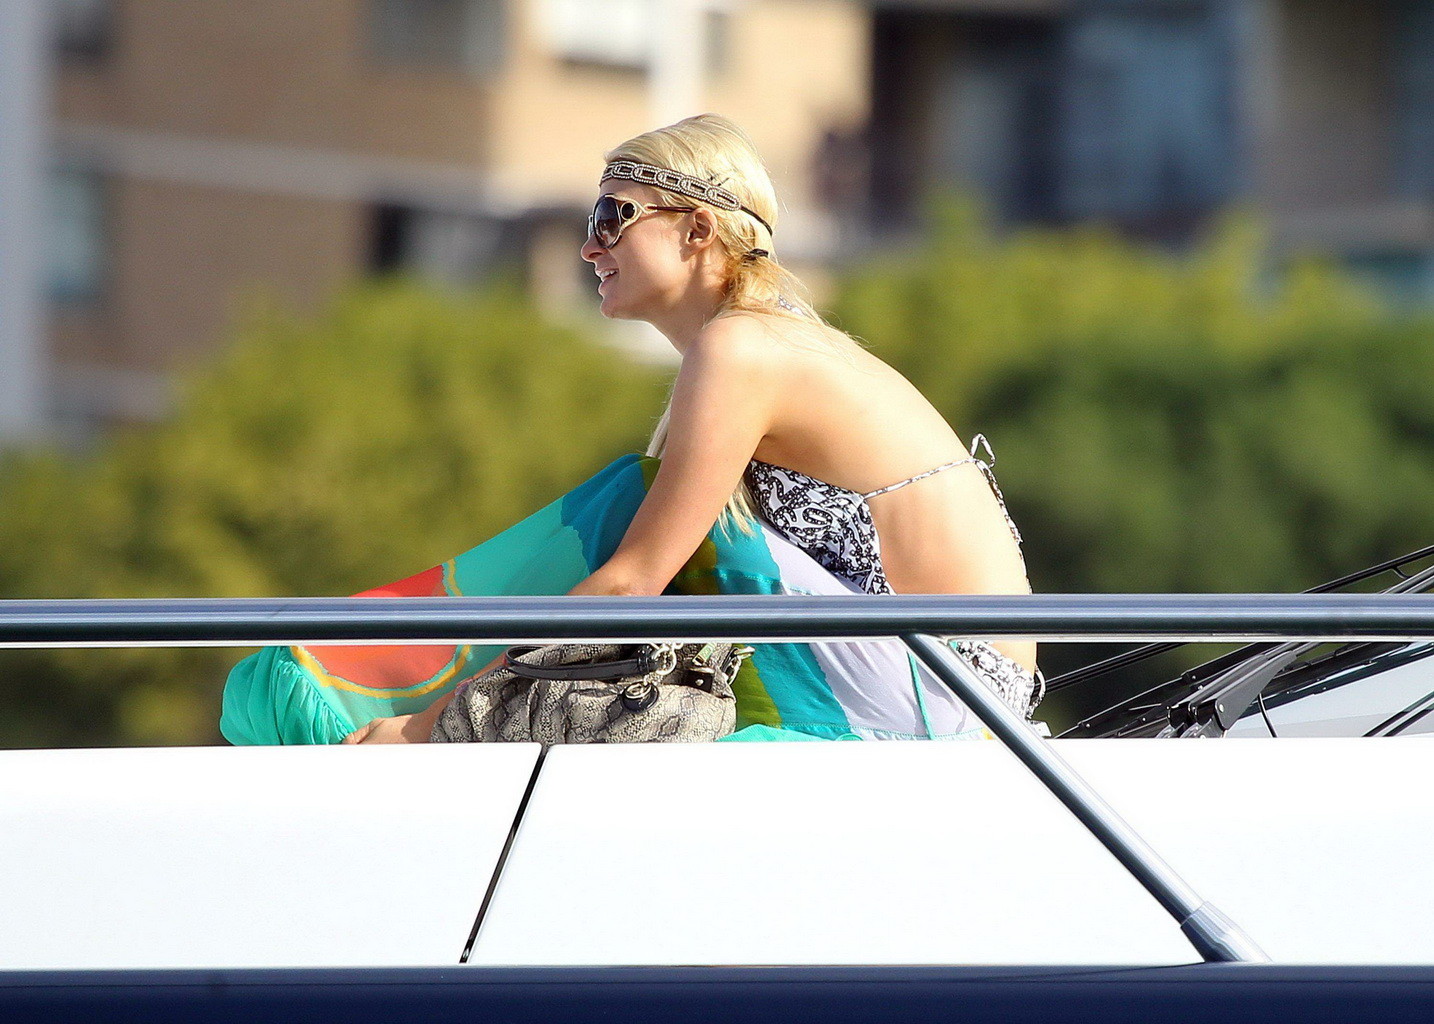 Paris Hilton showing her hot ass in deep cut swimsuit at the yacht in Sydney Har #75268165